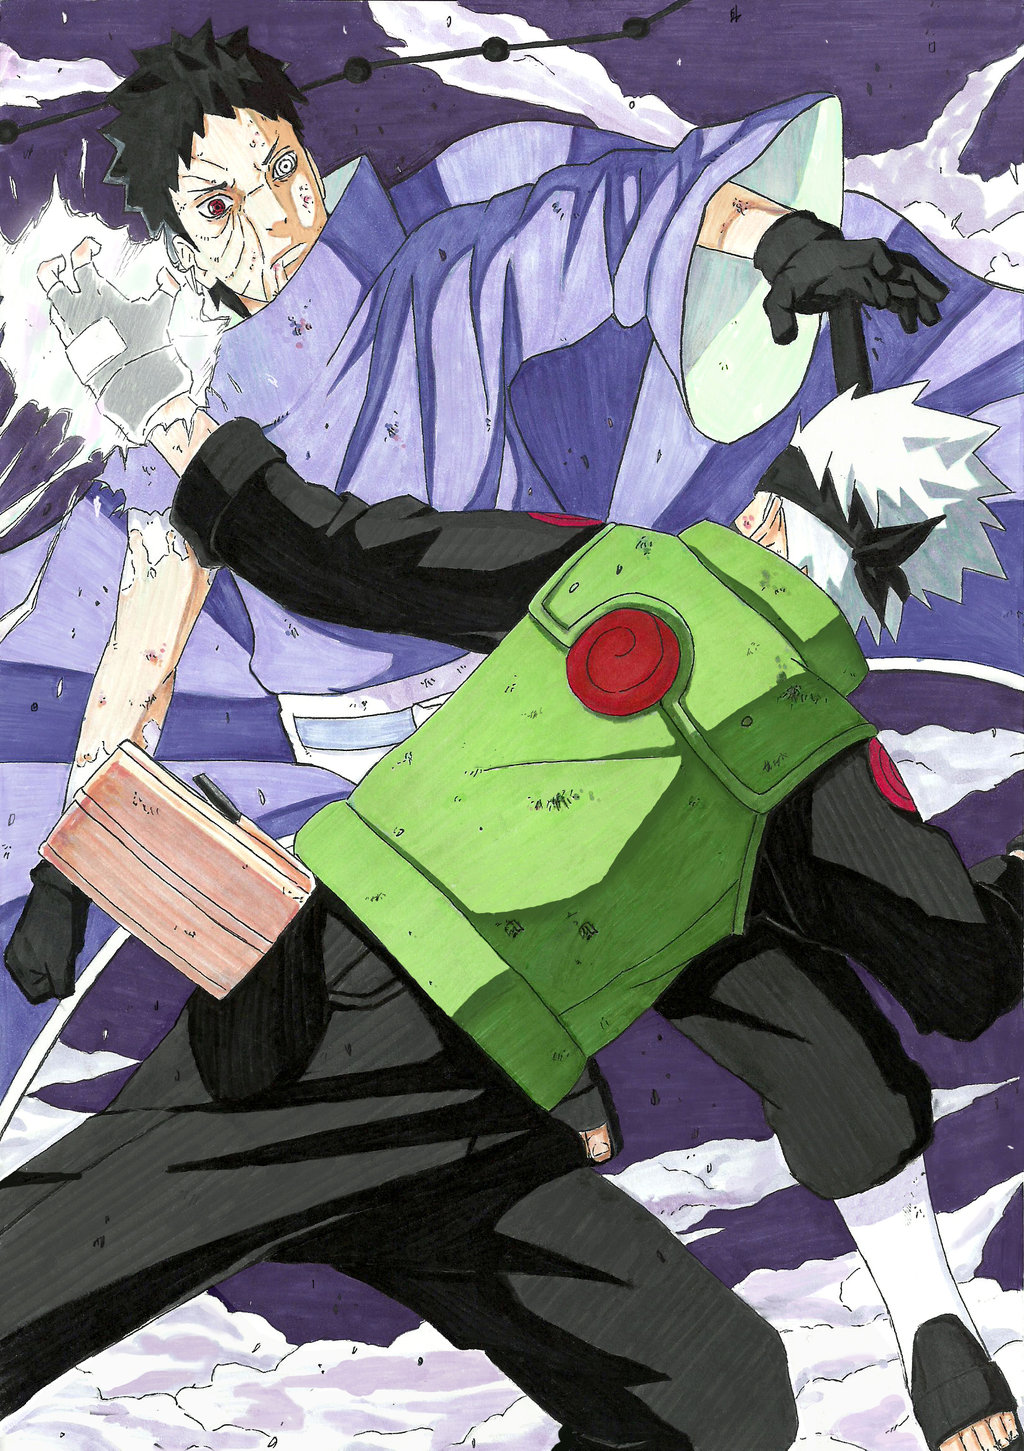 Free Download Obito Vs Kakashi By Emukcs 1024x1451 For Your